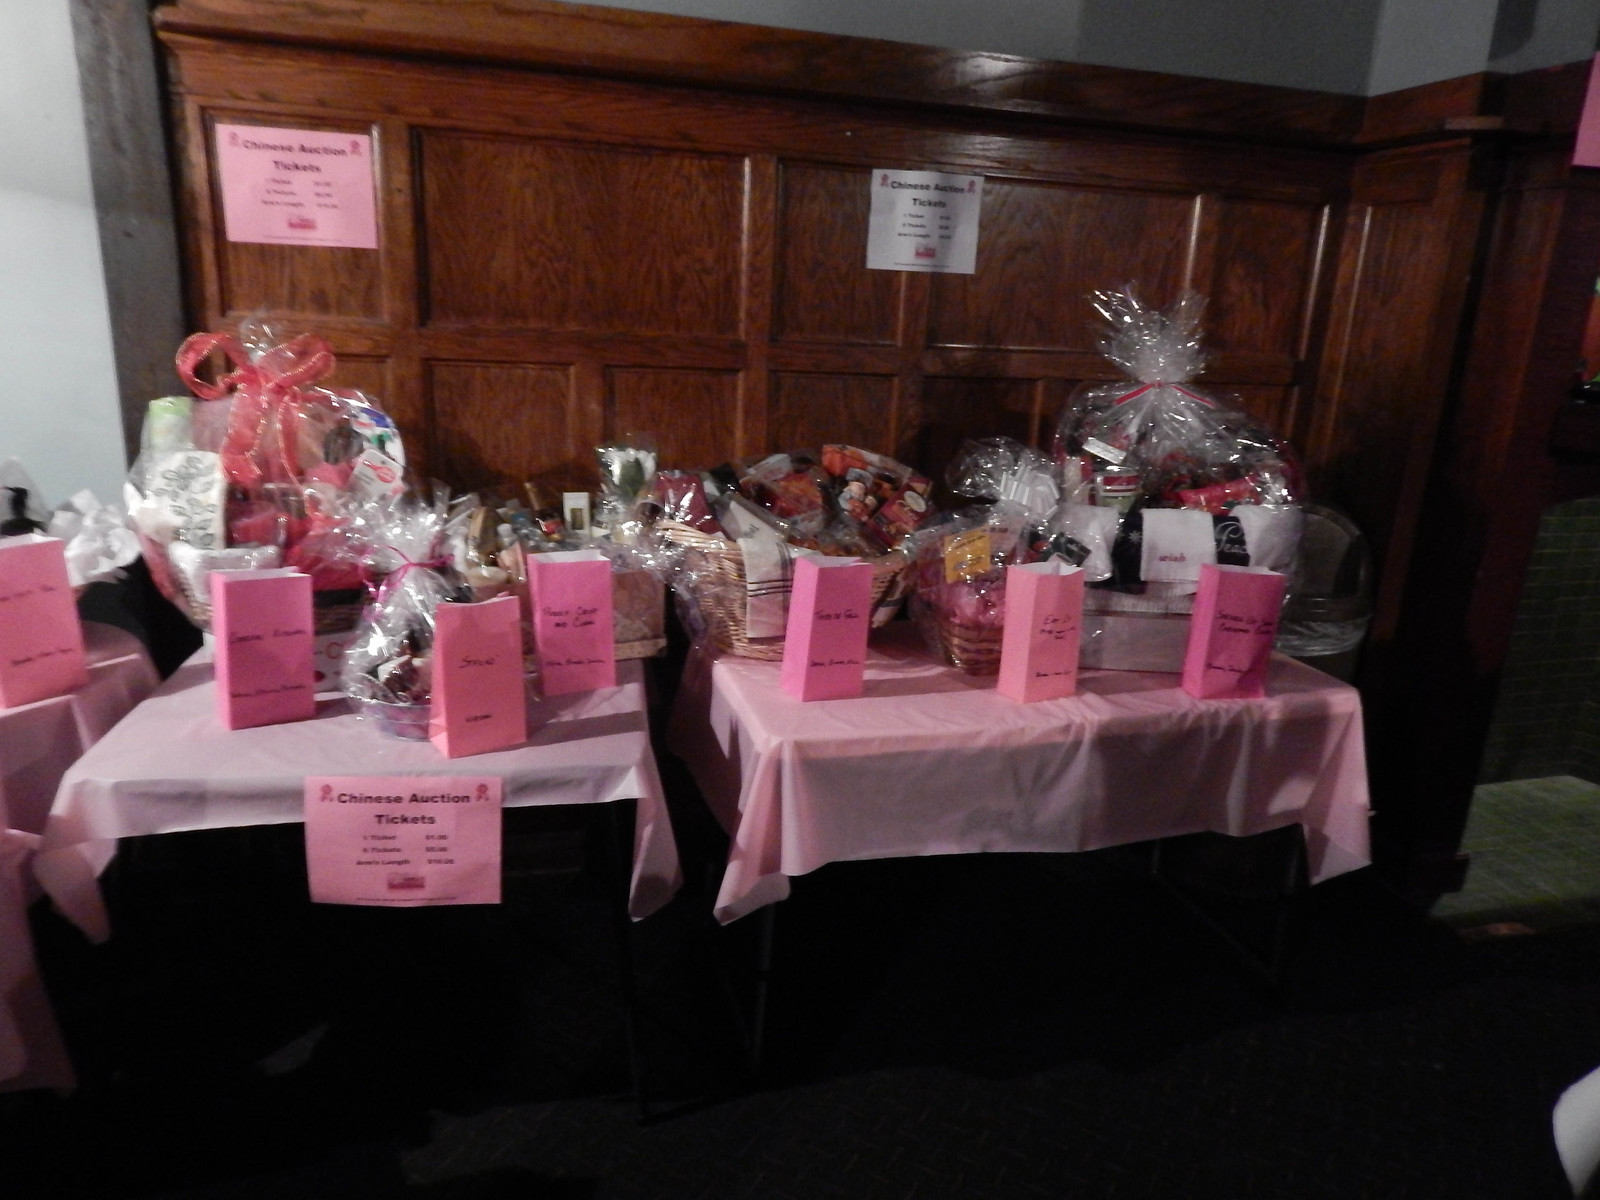 Auctions items at Benefit